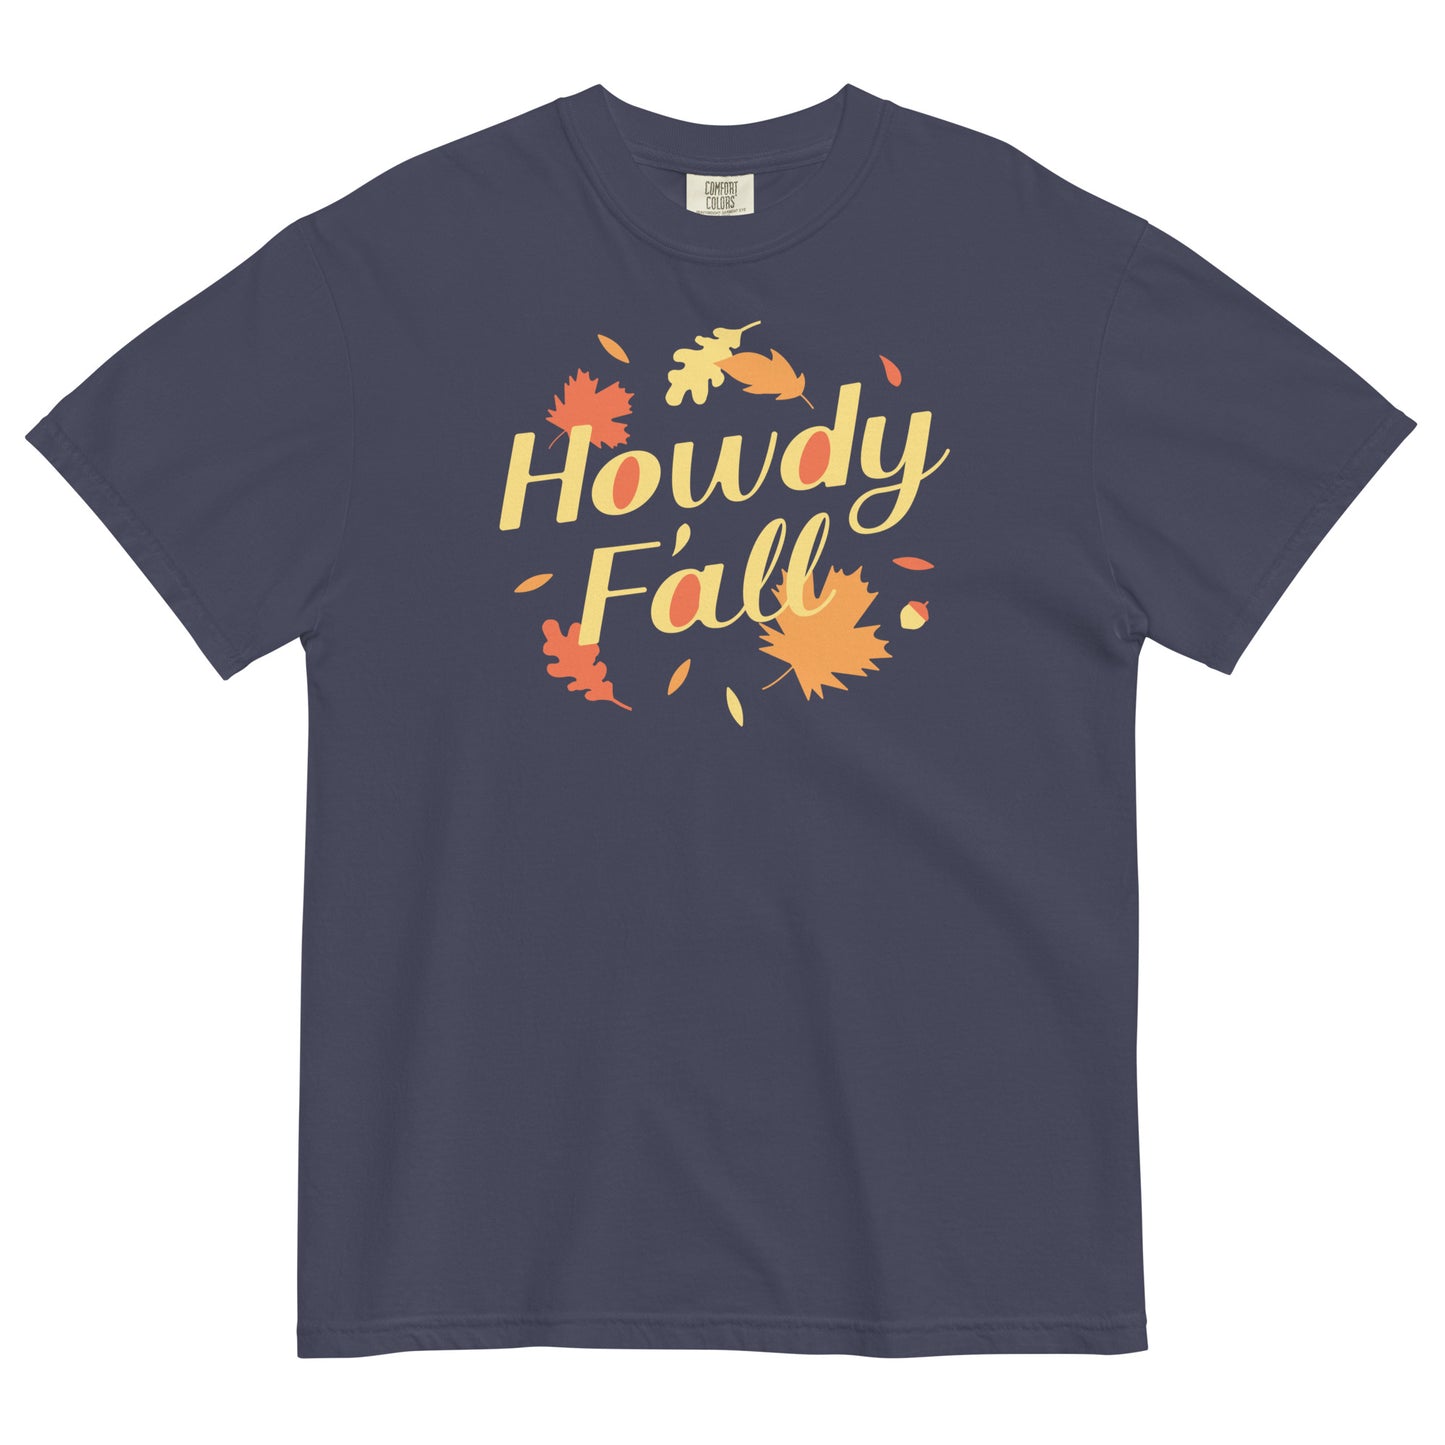 Howdy F'all Men's Relaxed Fit Tee